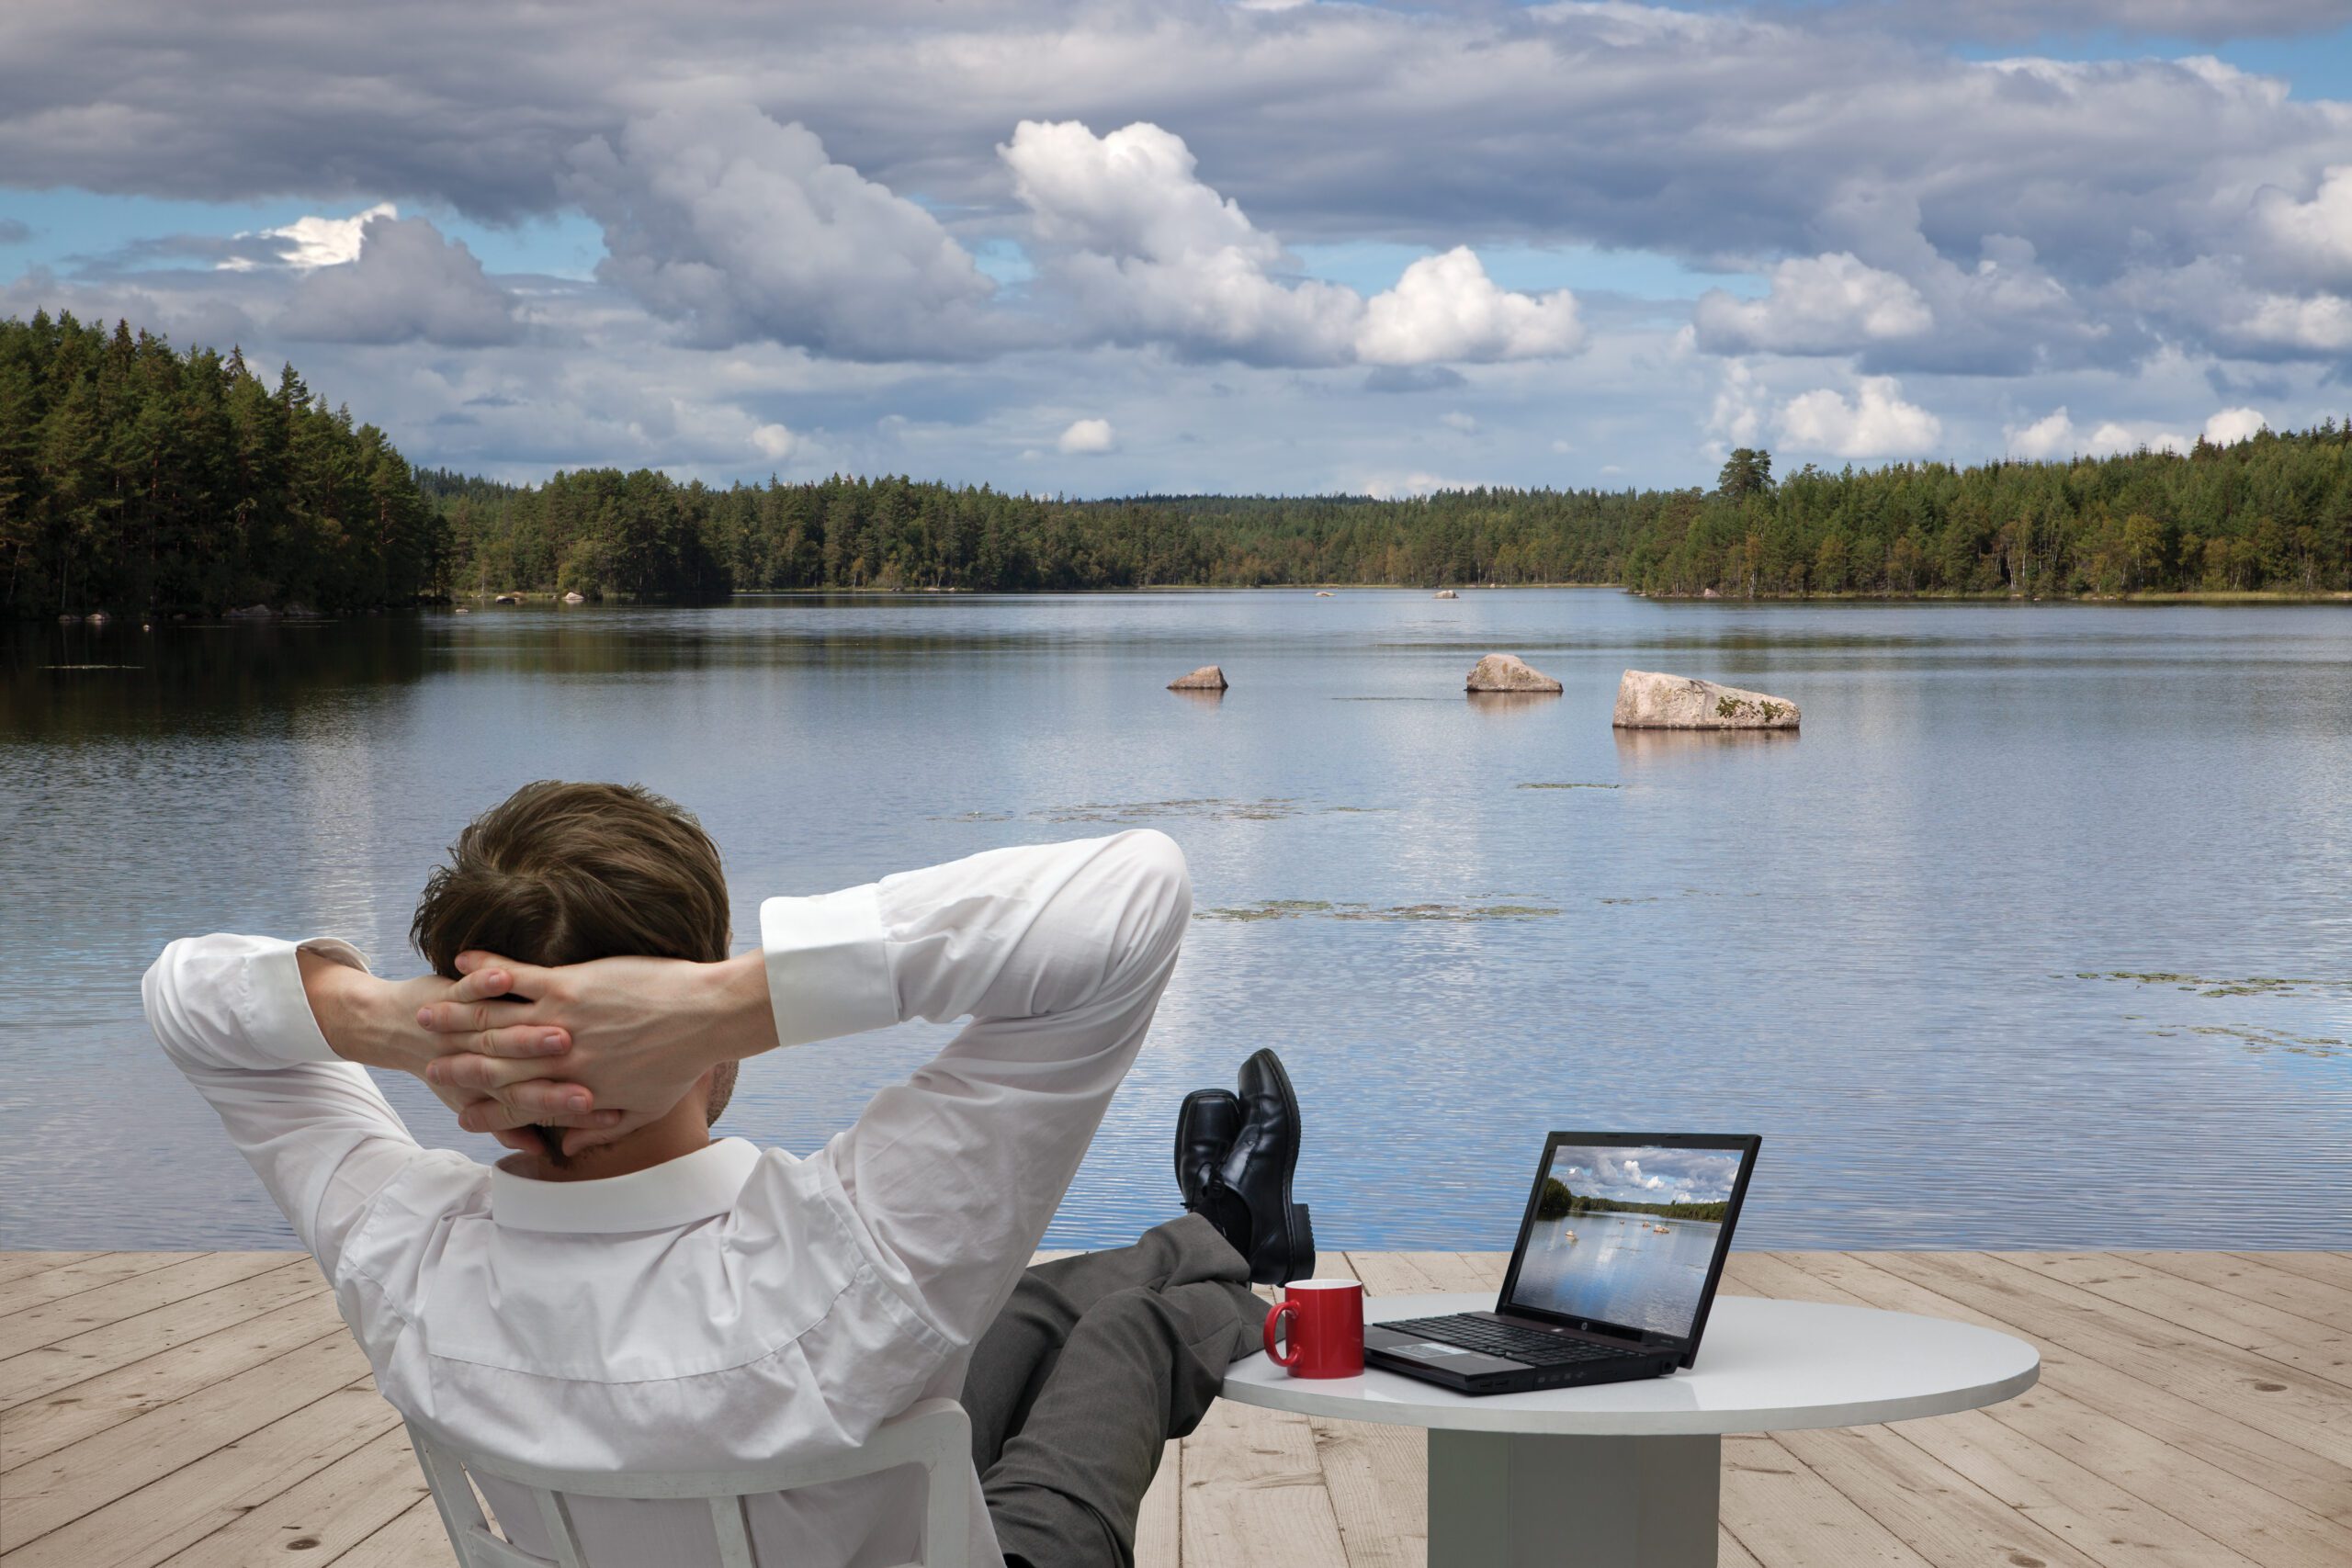 Mobile Office Mastery: Working Remotely While Embracing Wanderlust